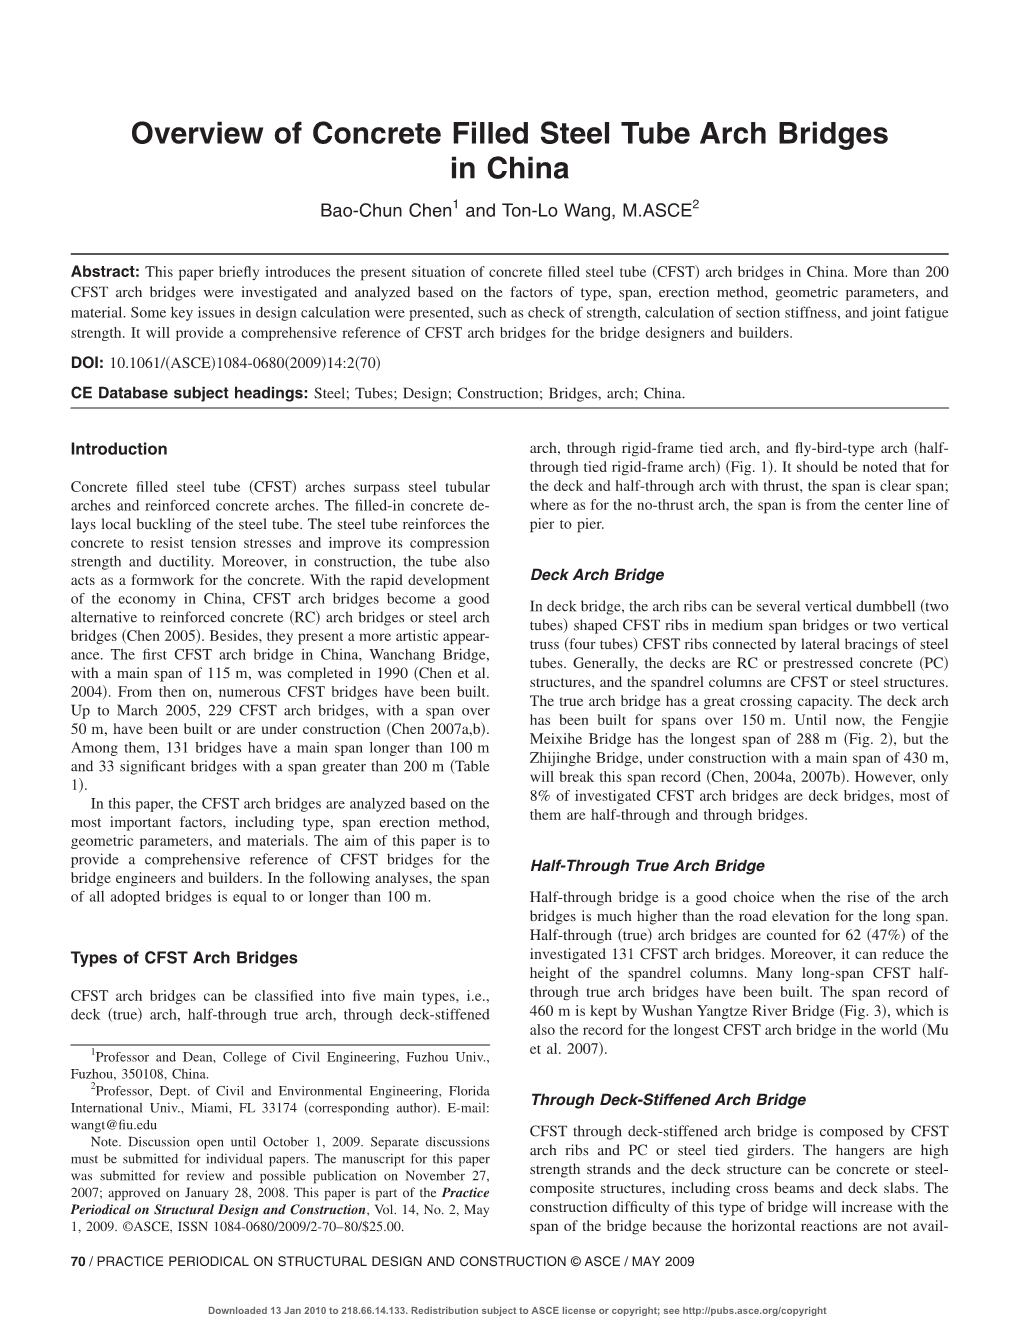 Overview of Concrete Filled Steel Tube Arch Bridges in China Bao-Chun Chen1 and Ton-Lo Wang, M.ASCE2